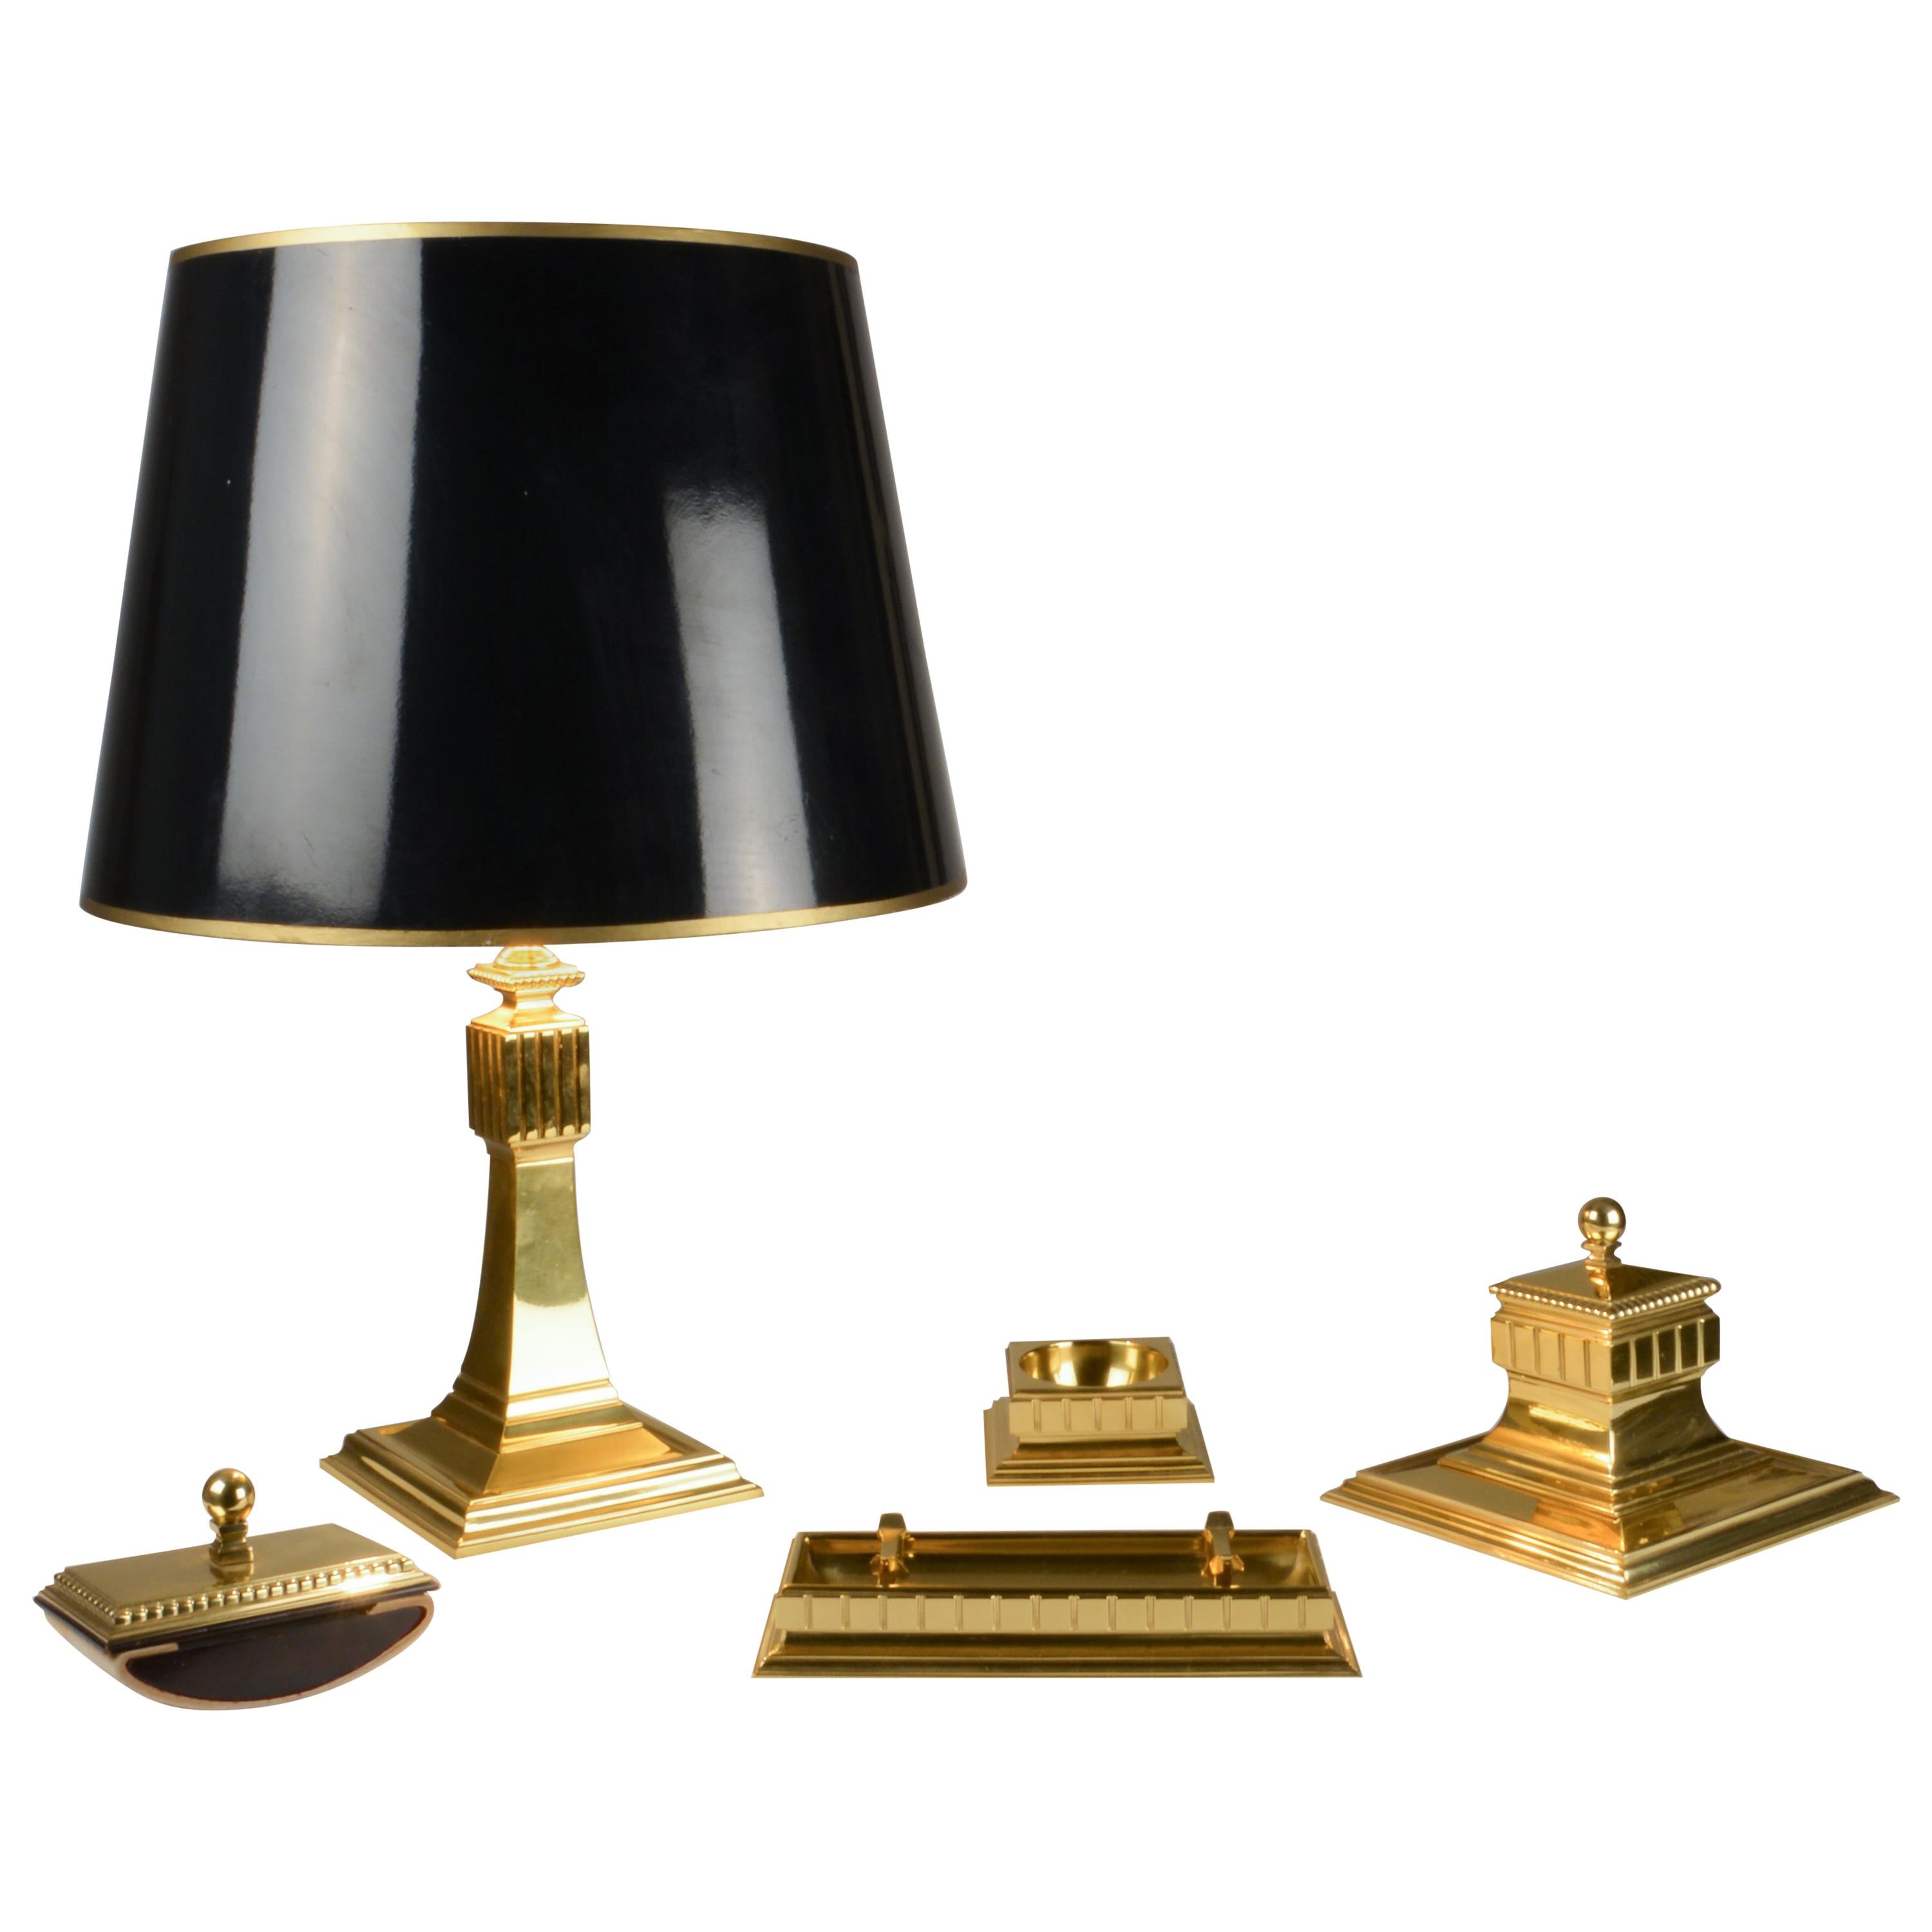 Art Deco Brass Table Lamp and Writing Set with Ink Well and Blotter Rocker im Angebot